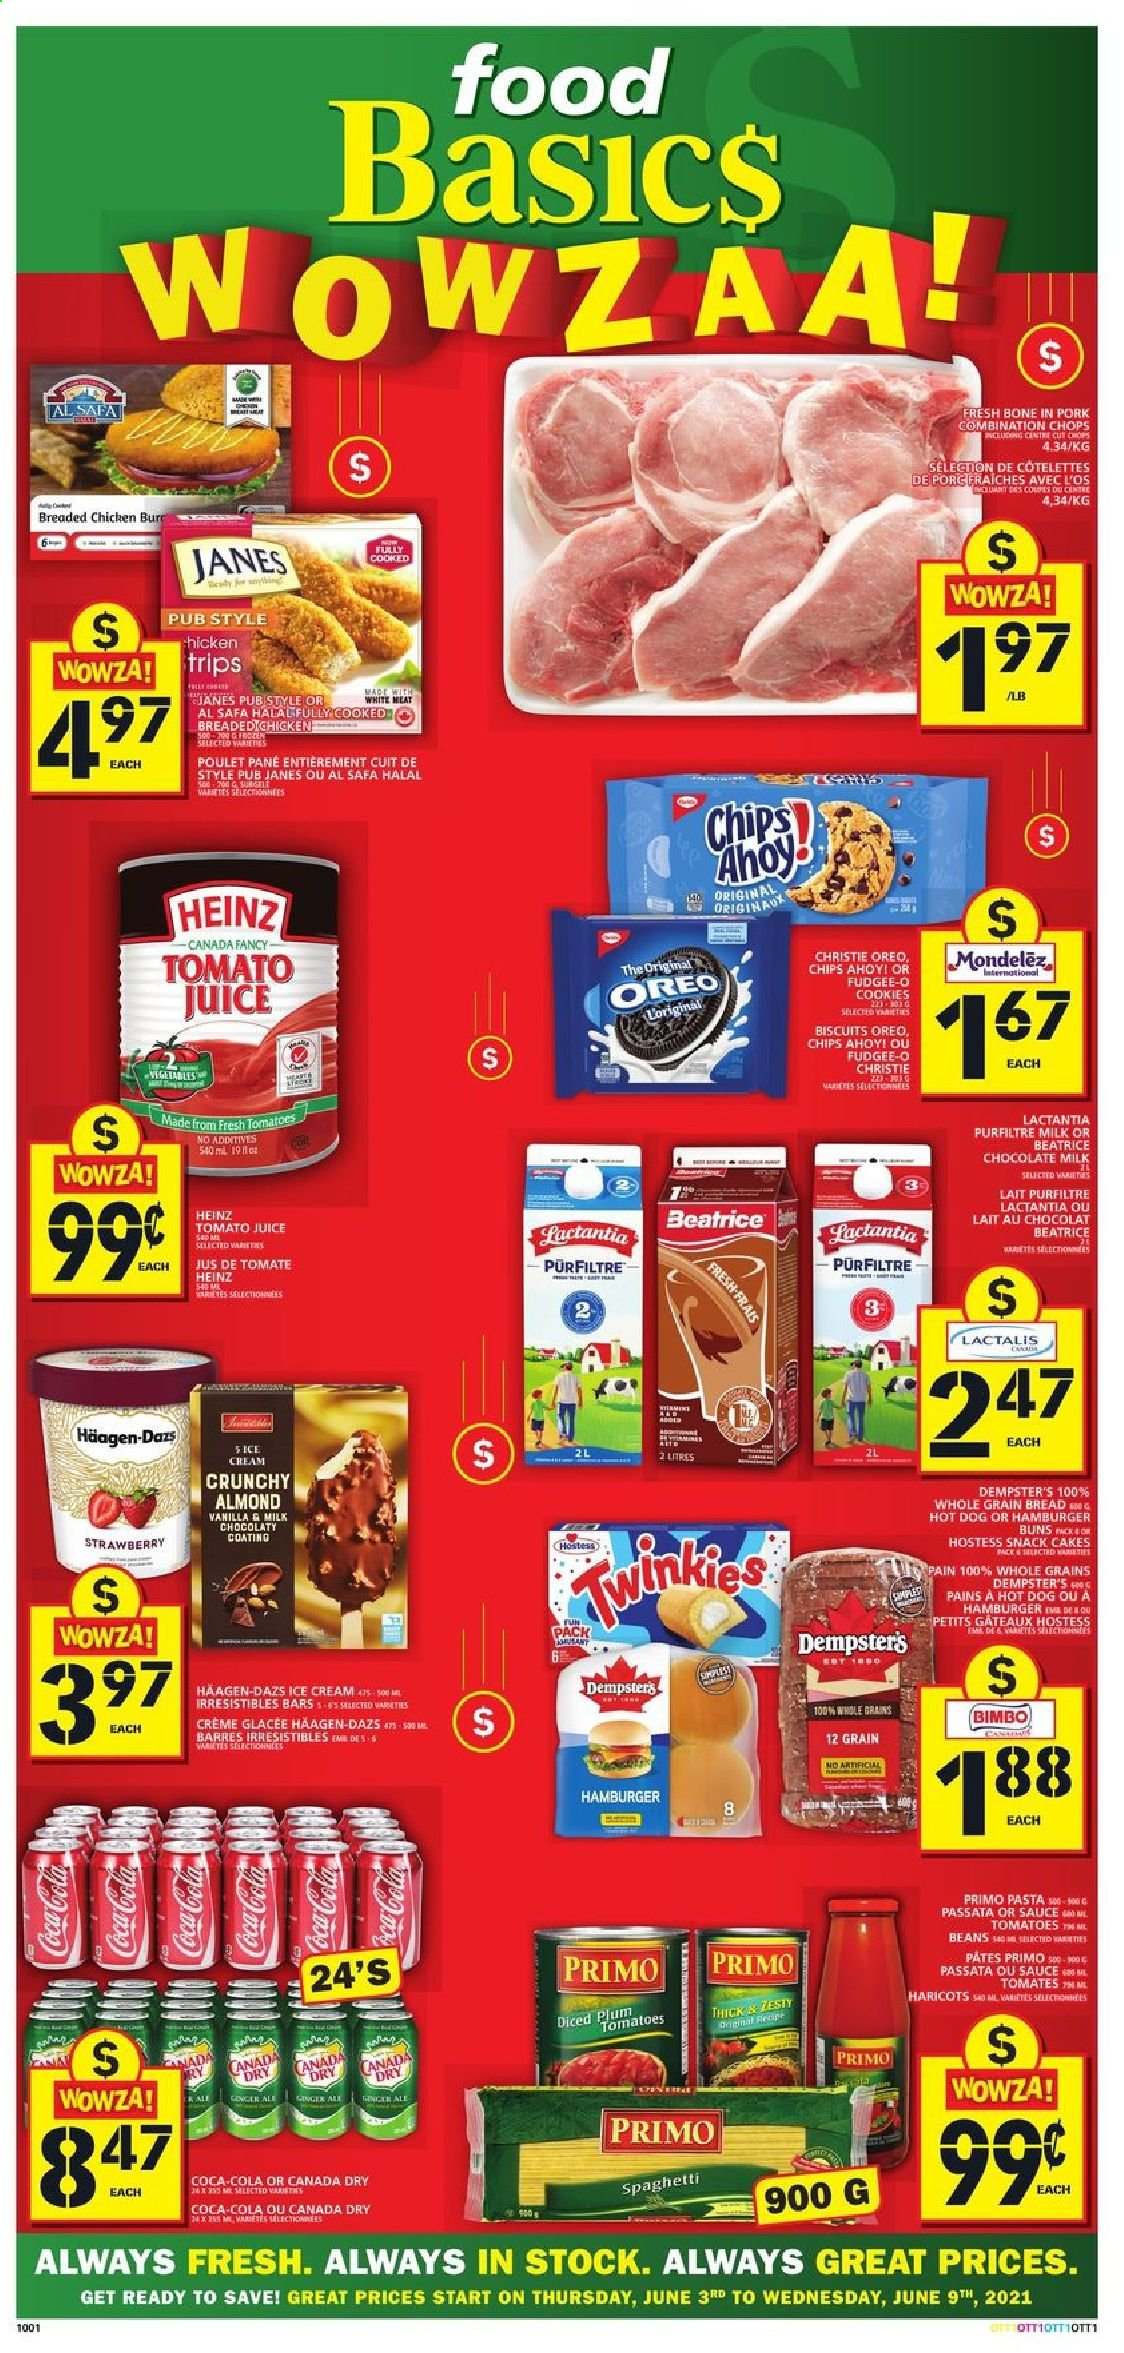 thumbnail - Food Basics Flyer - June 03, 2021 - June 09, 2021 - Sales products - bread, cake, buns, burger buns, beans, ginger, spaghetti, hot dog, pasta, fried chicken, Oreo, milk, ice cream, Häagen-Dazs, cookies, milk chocolate, snack, biscuit, Heinz, Canada Dry, Coca-Cola, tomato juice, juice, chips. Page 1.